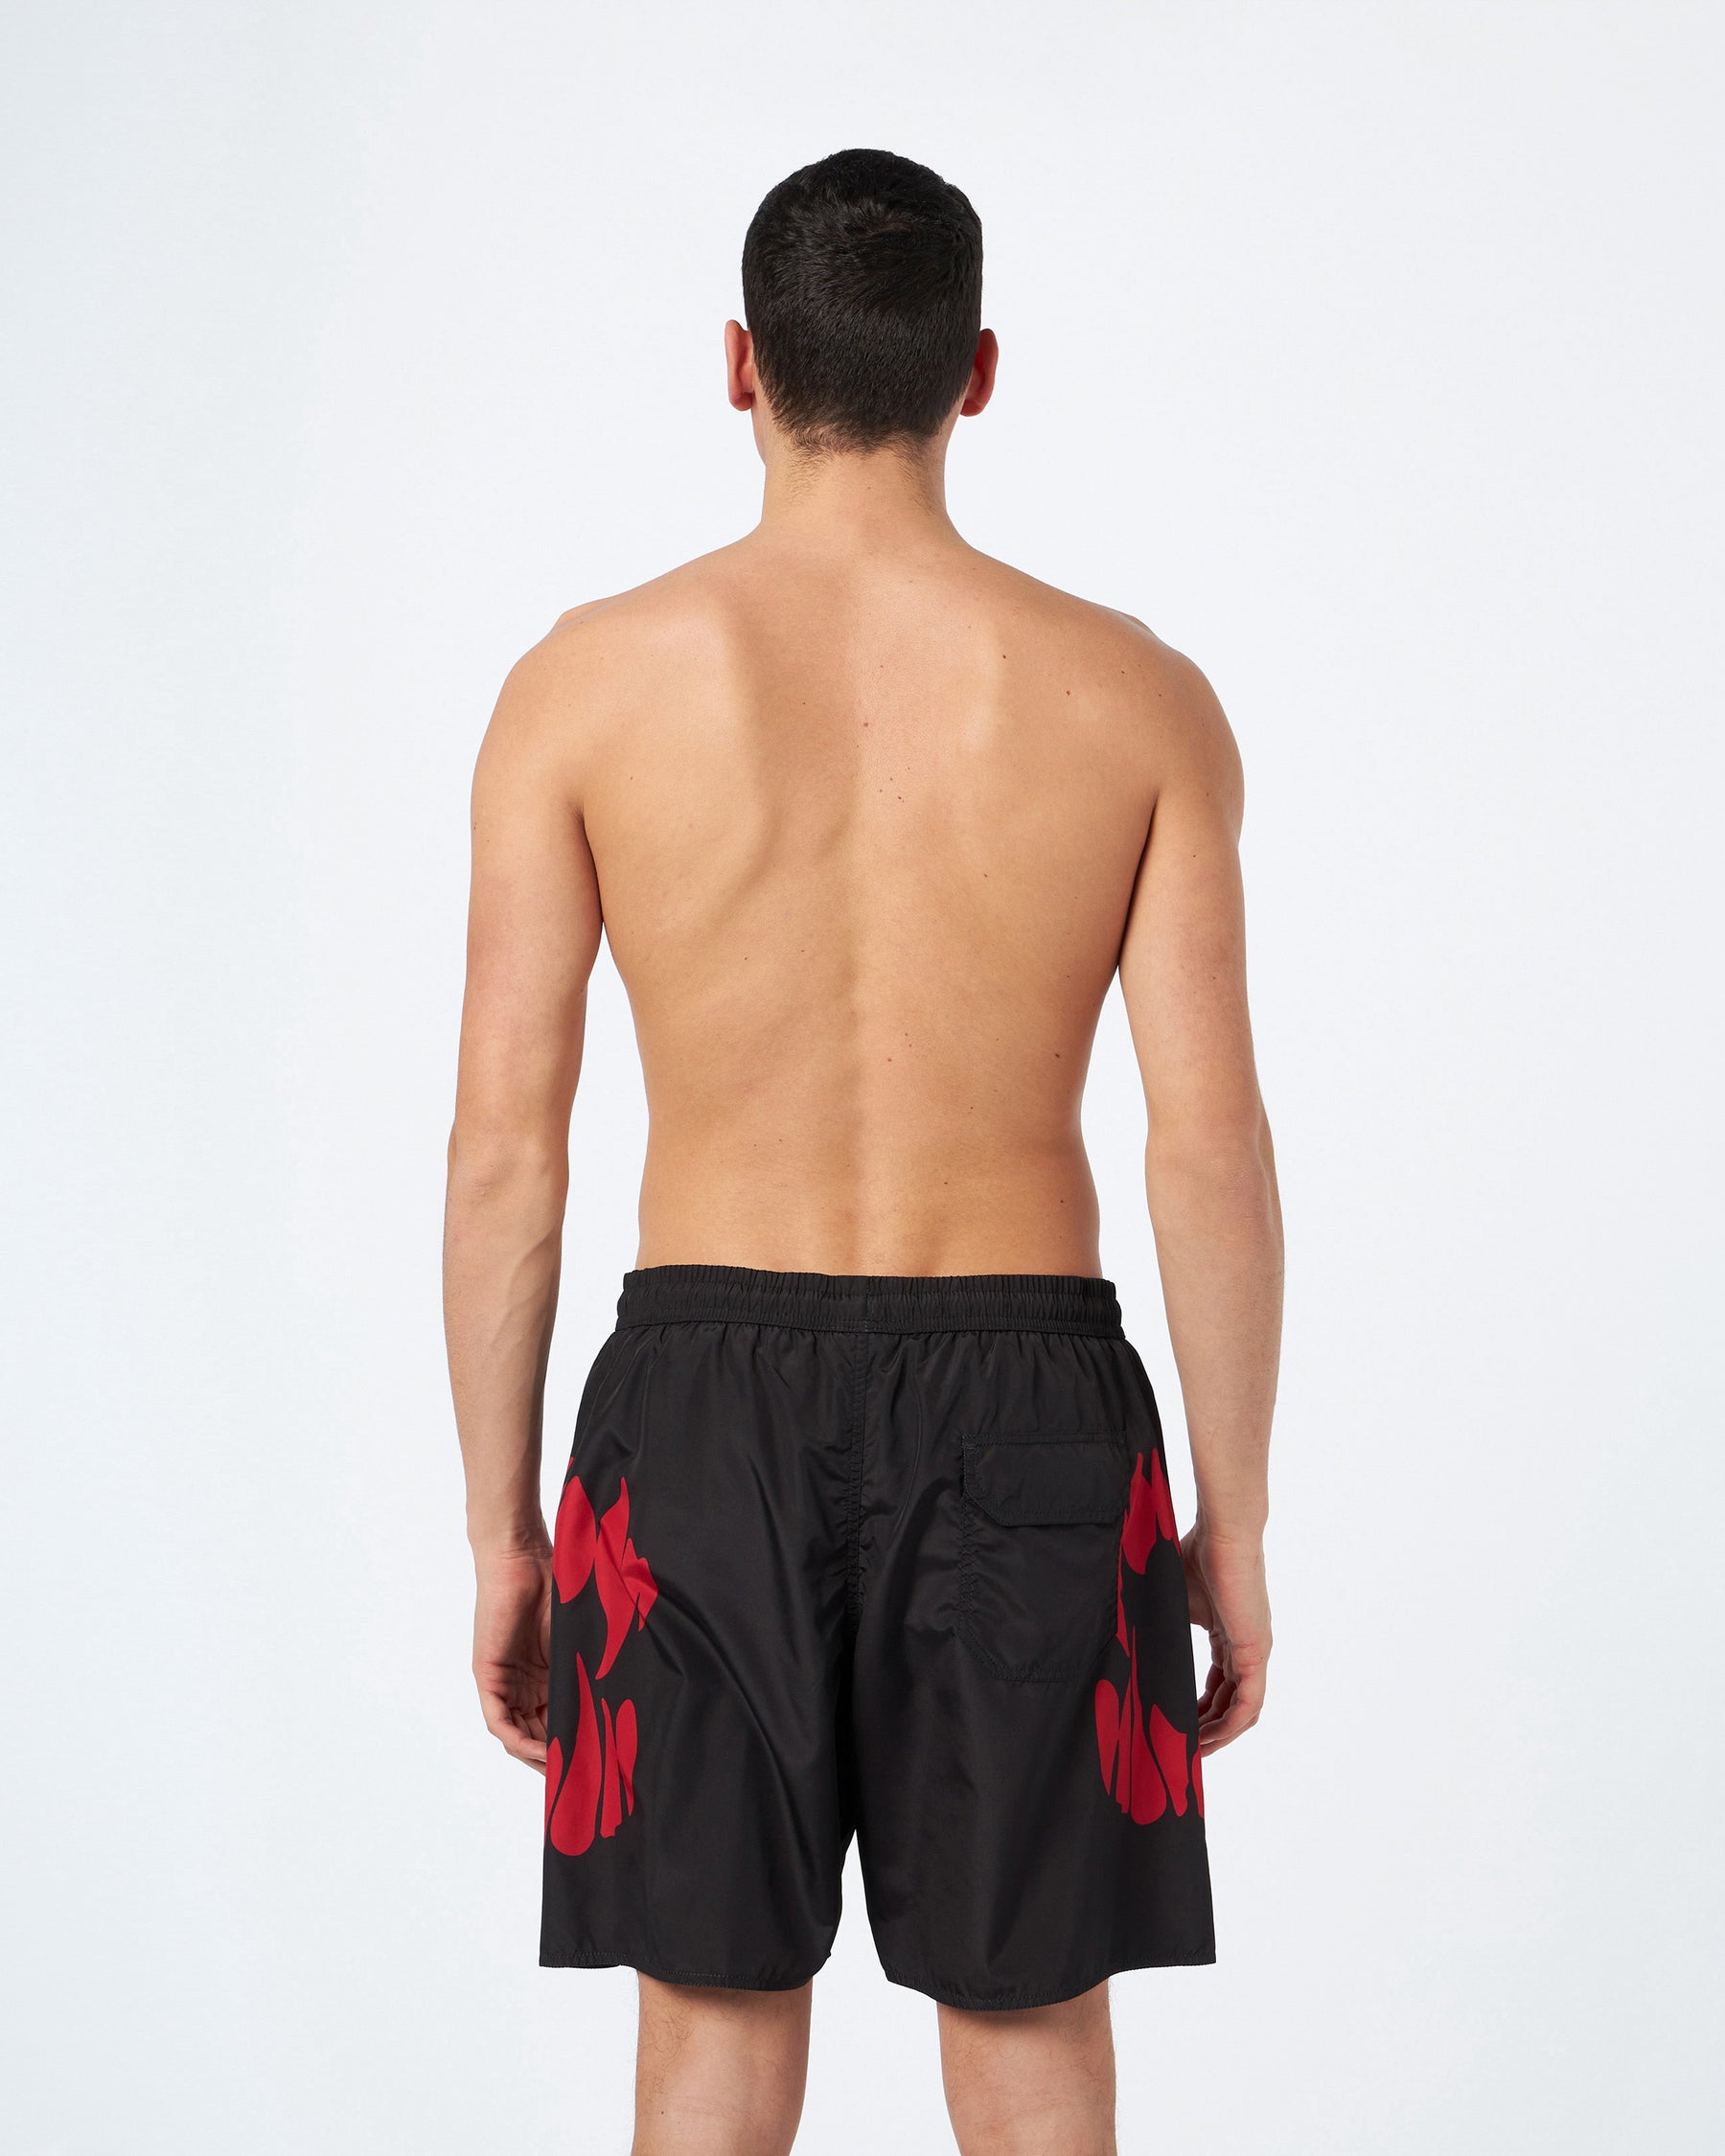 PHOBIA BLACK SWIMWEAR WITH RED MOUTH